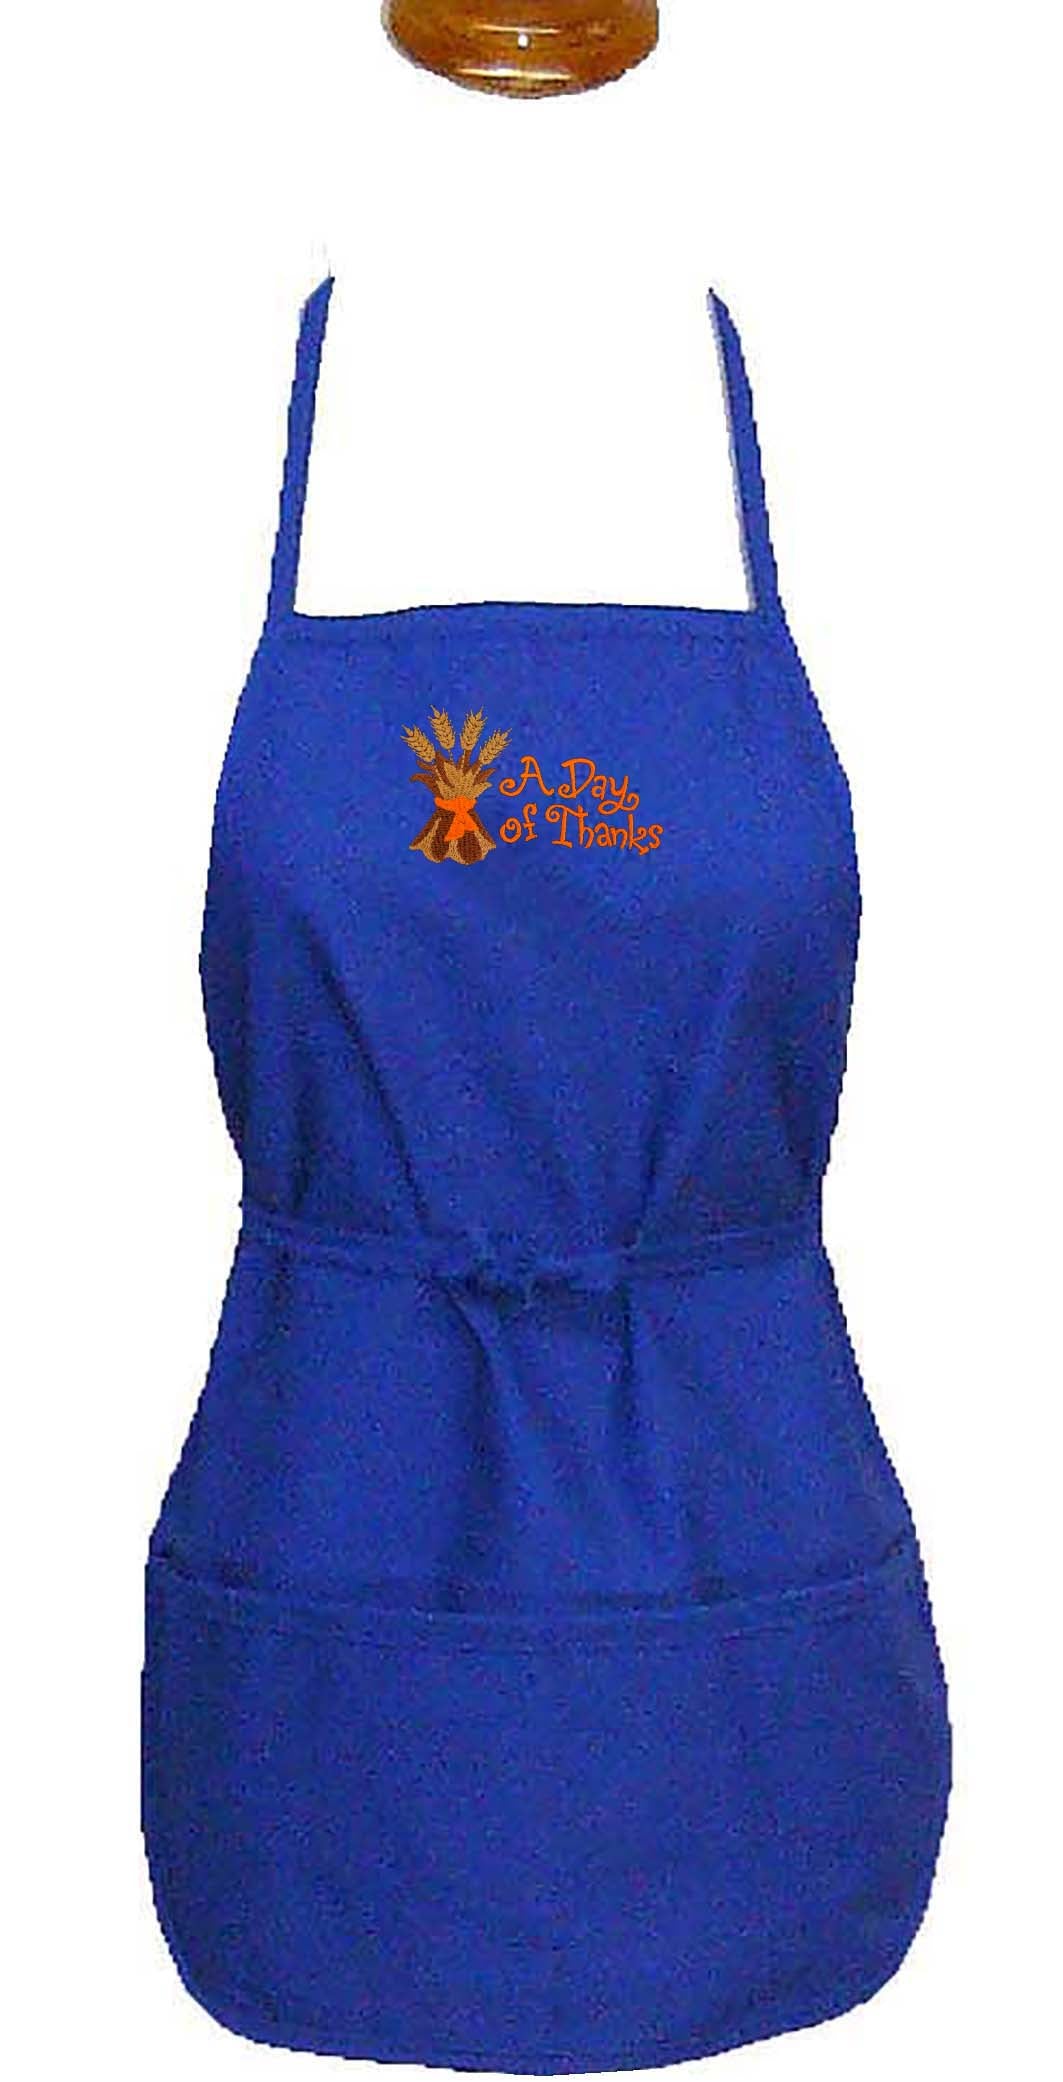 A Day Of Thanks, Blue Youth Small Apron